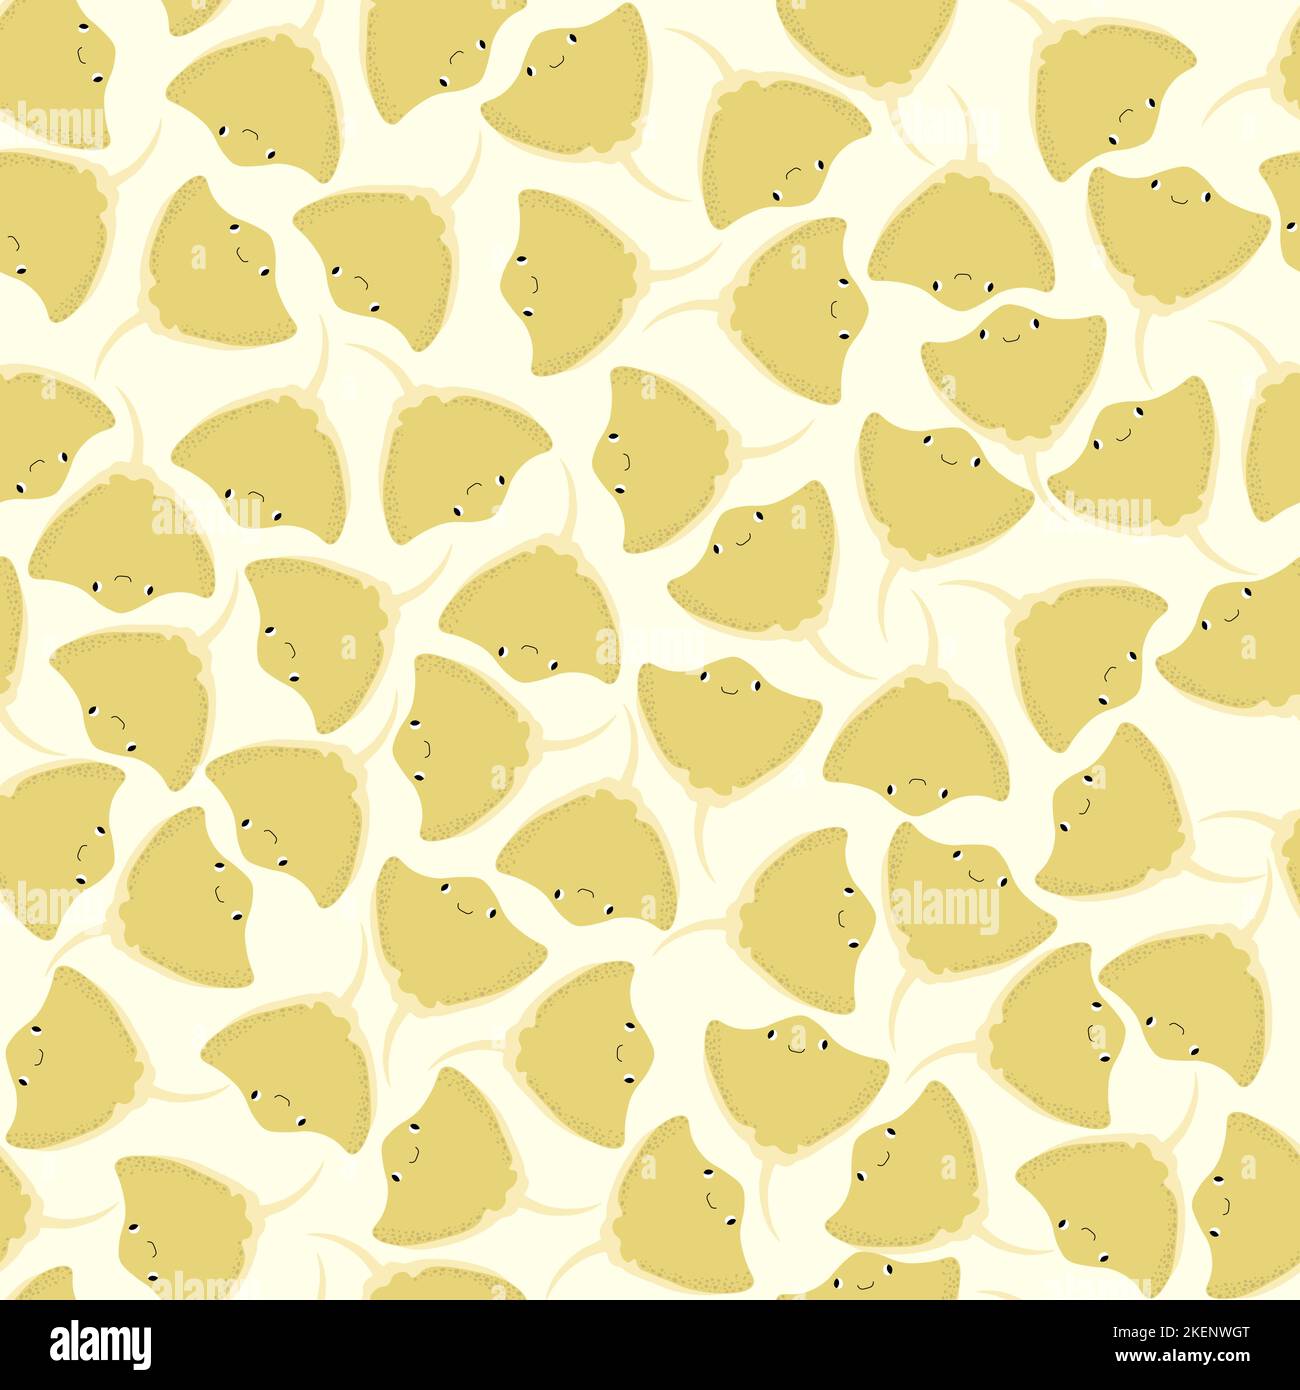 Vector seamless pattern with devilfish.Underwater cartoon creatures.Marine background.Cute ocean pattern for fabric, childrens clothing,textiles Stock Vector